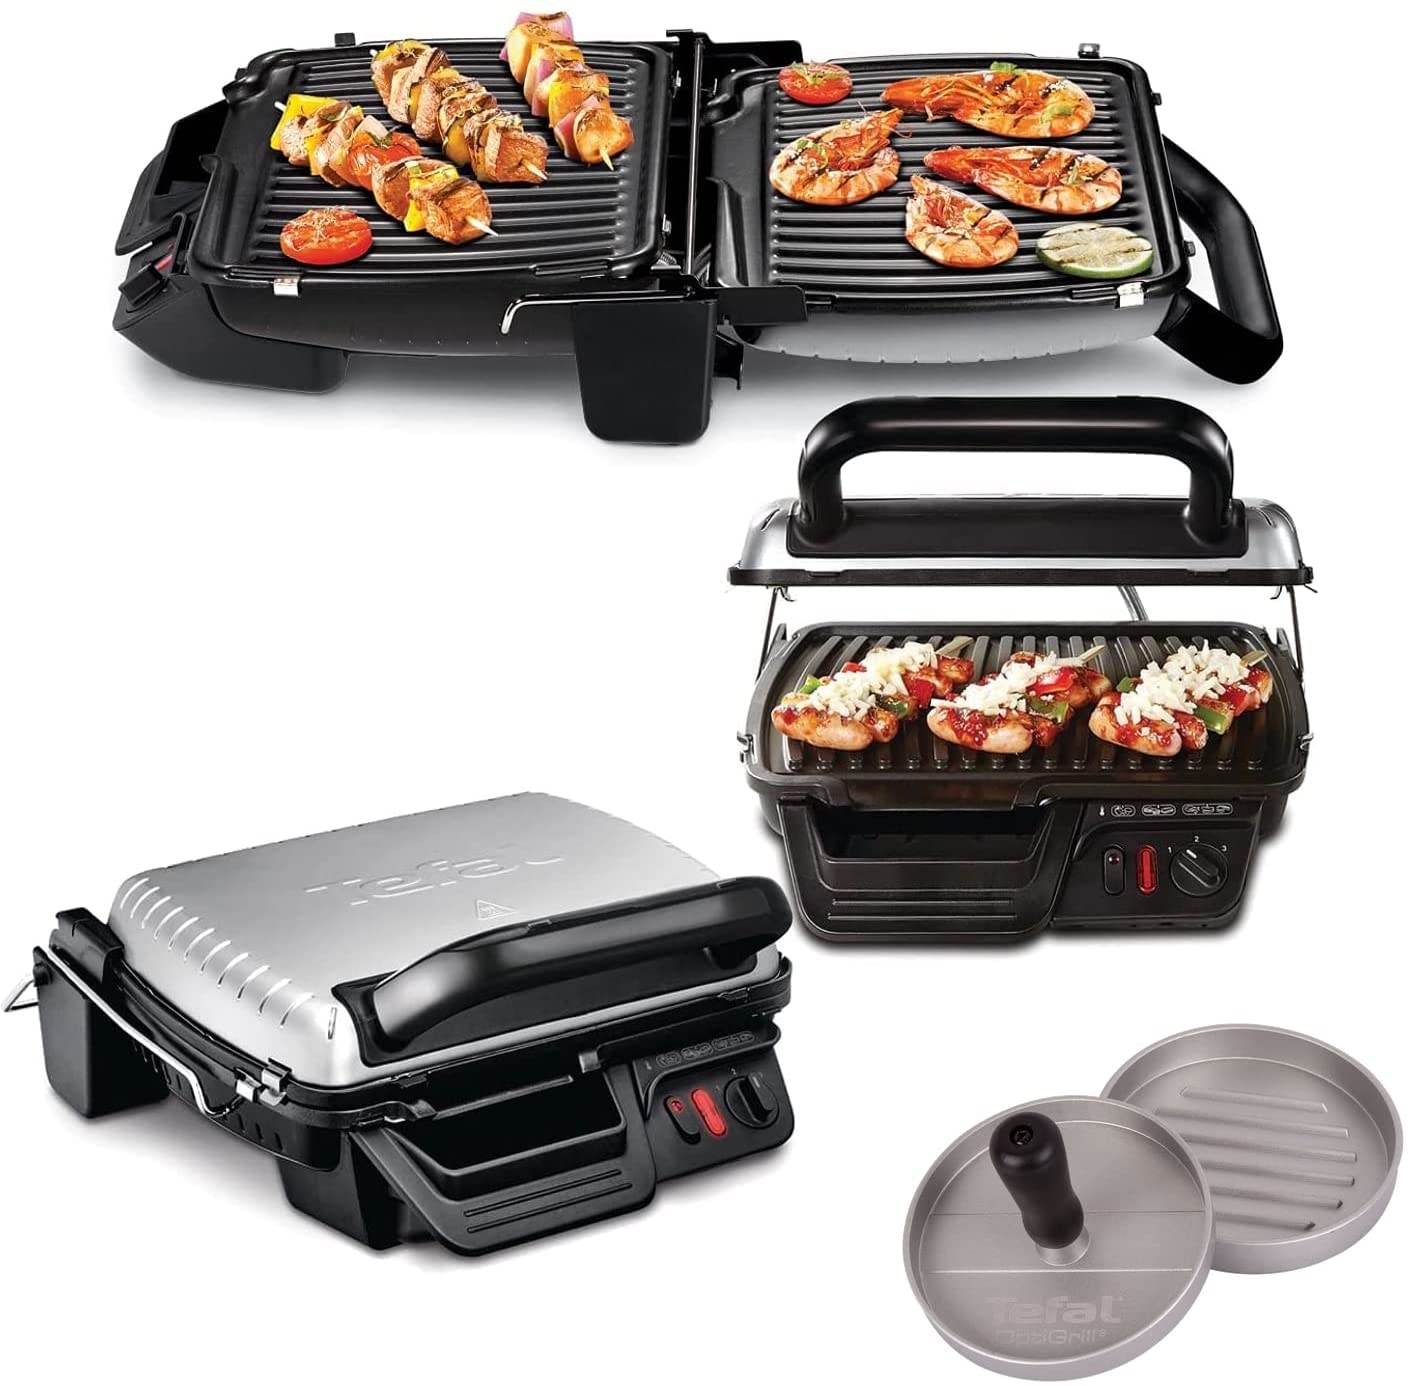 Tefal 3-in-1 Electric Contact Grill with Overbaking Function and Table Gril